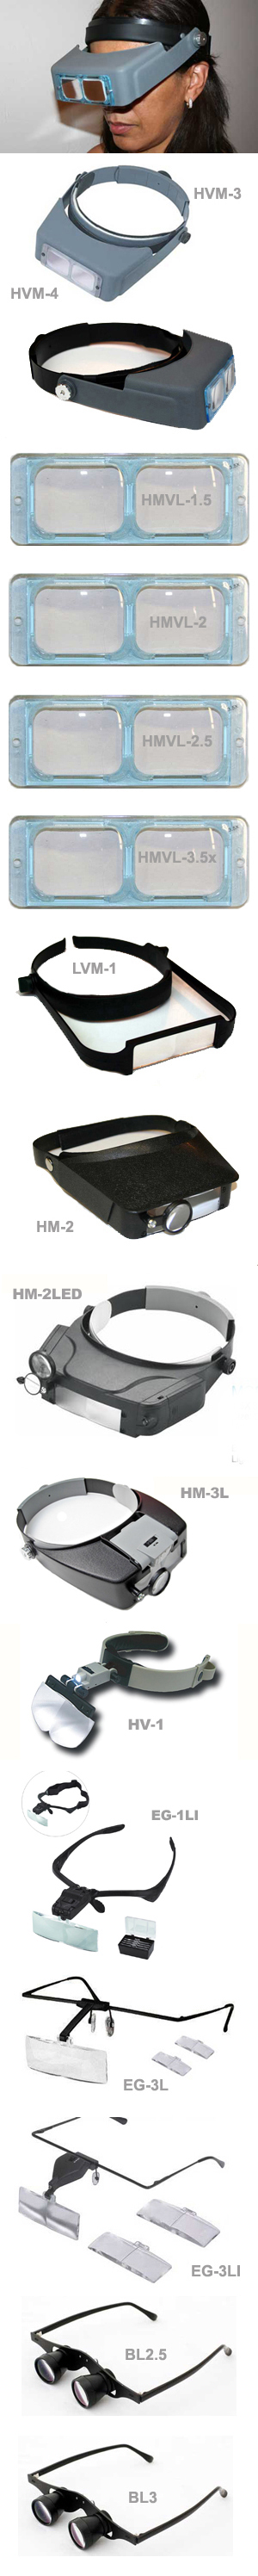 LED Illuminated Head Magnifier Visor with 4 Acrylic Lens Set, industrial  magnifying glass supplier